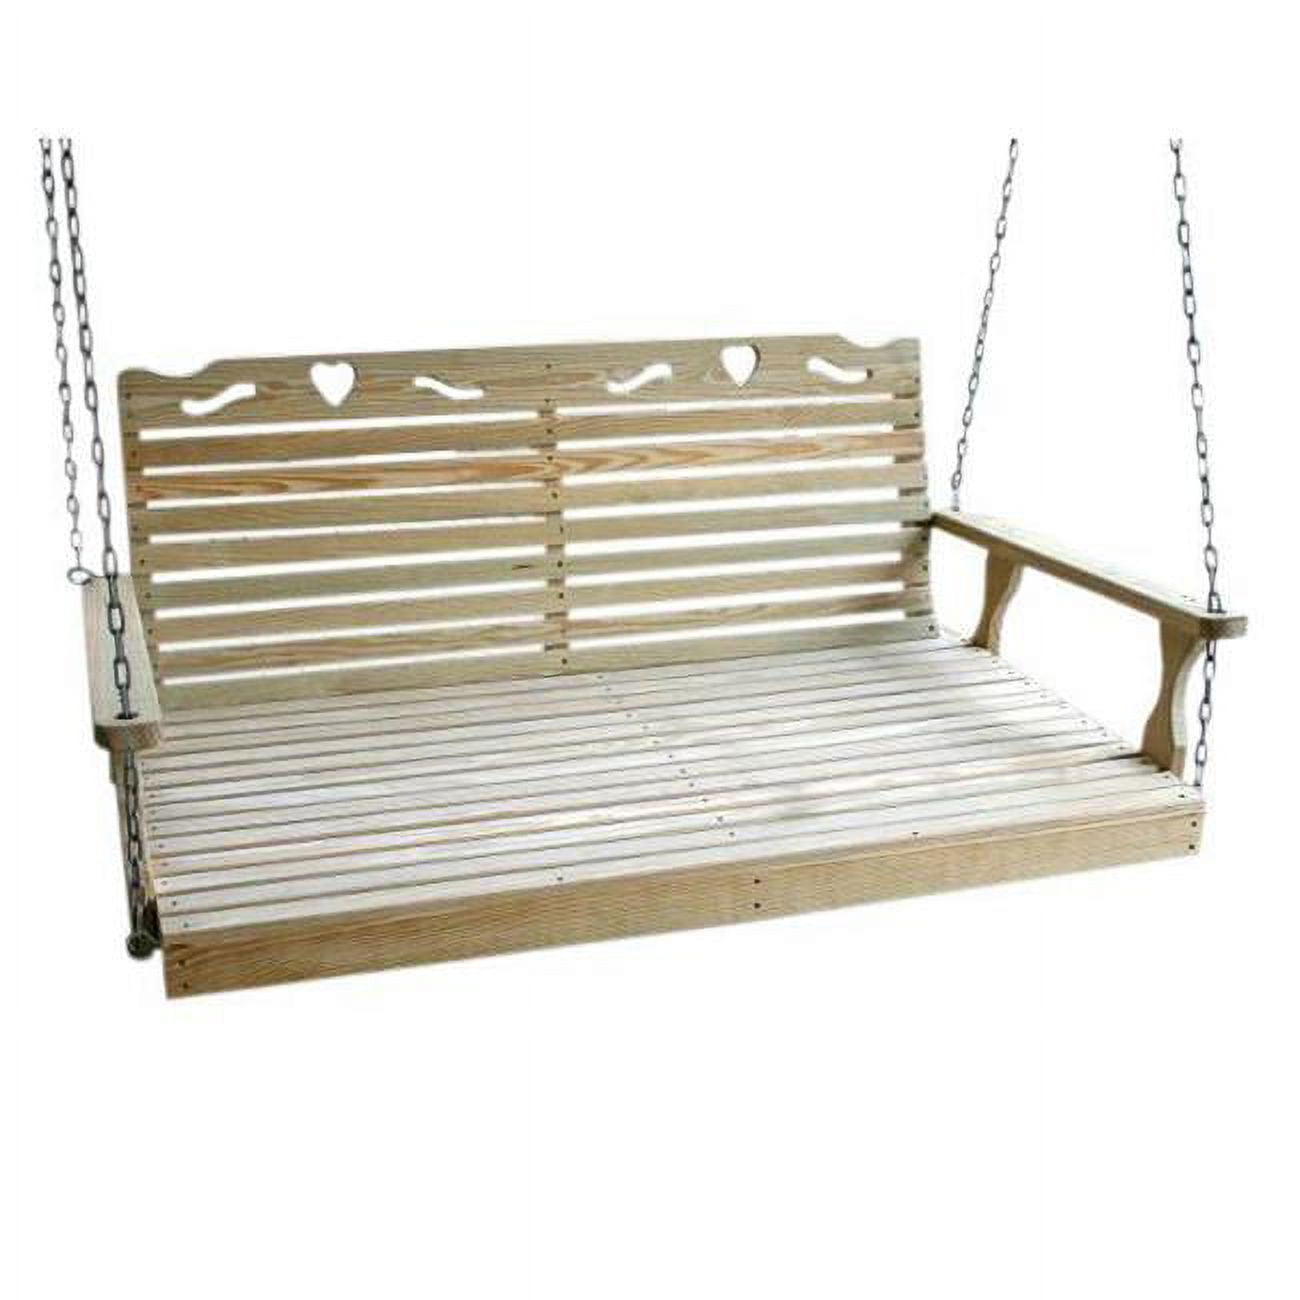 Picture of Creekvine Designs FTSBED60CHCVD 60 in. Treated Pine Crossback with Hearts Swingbed